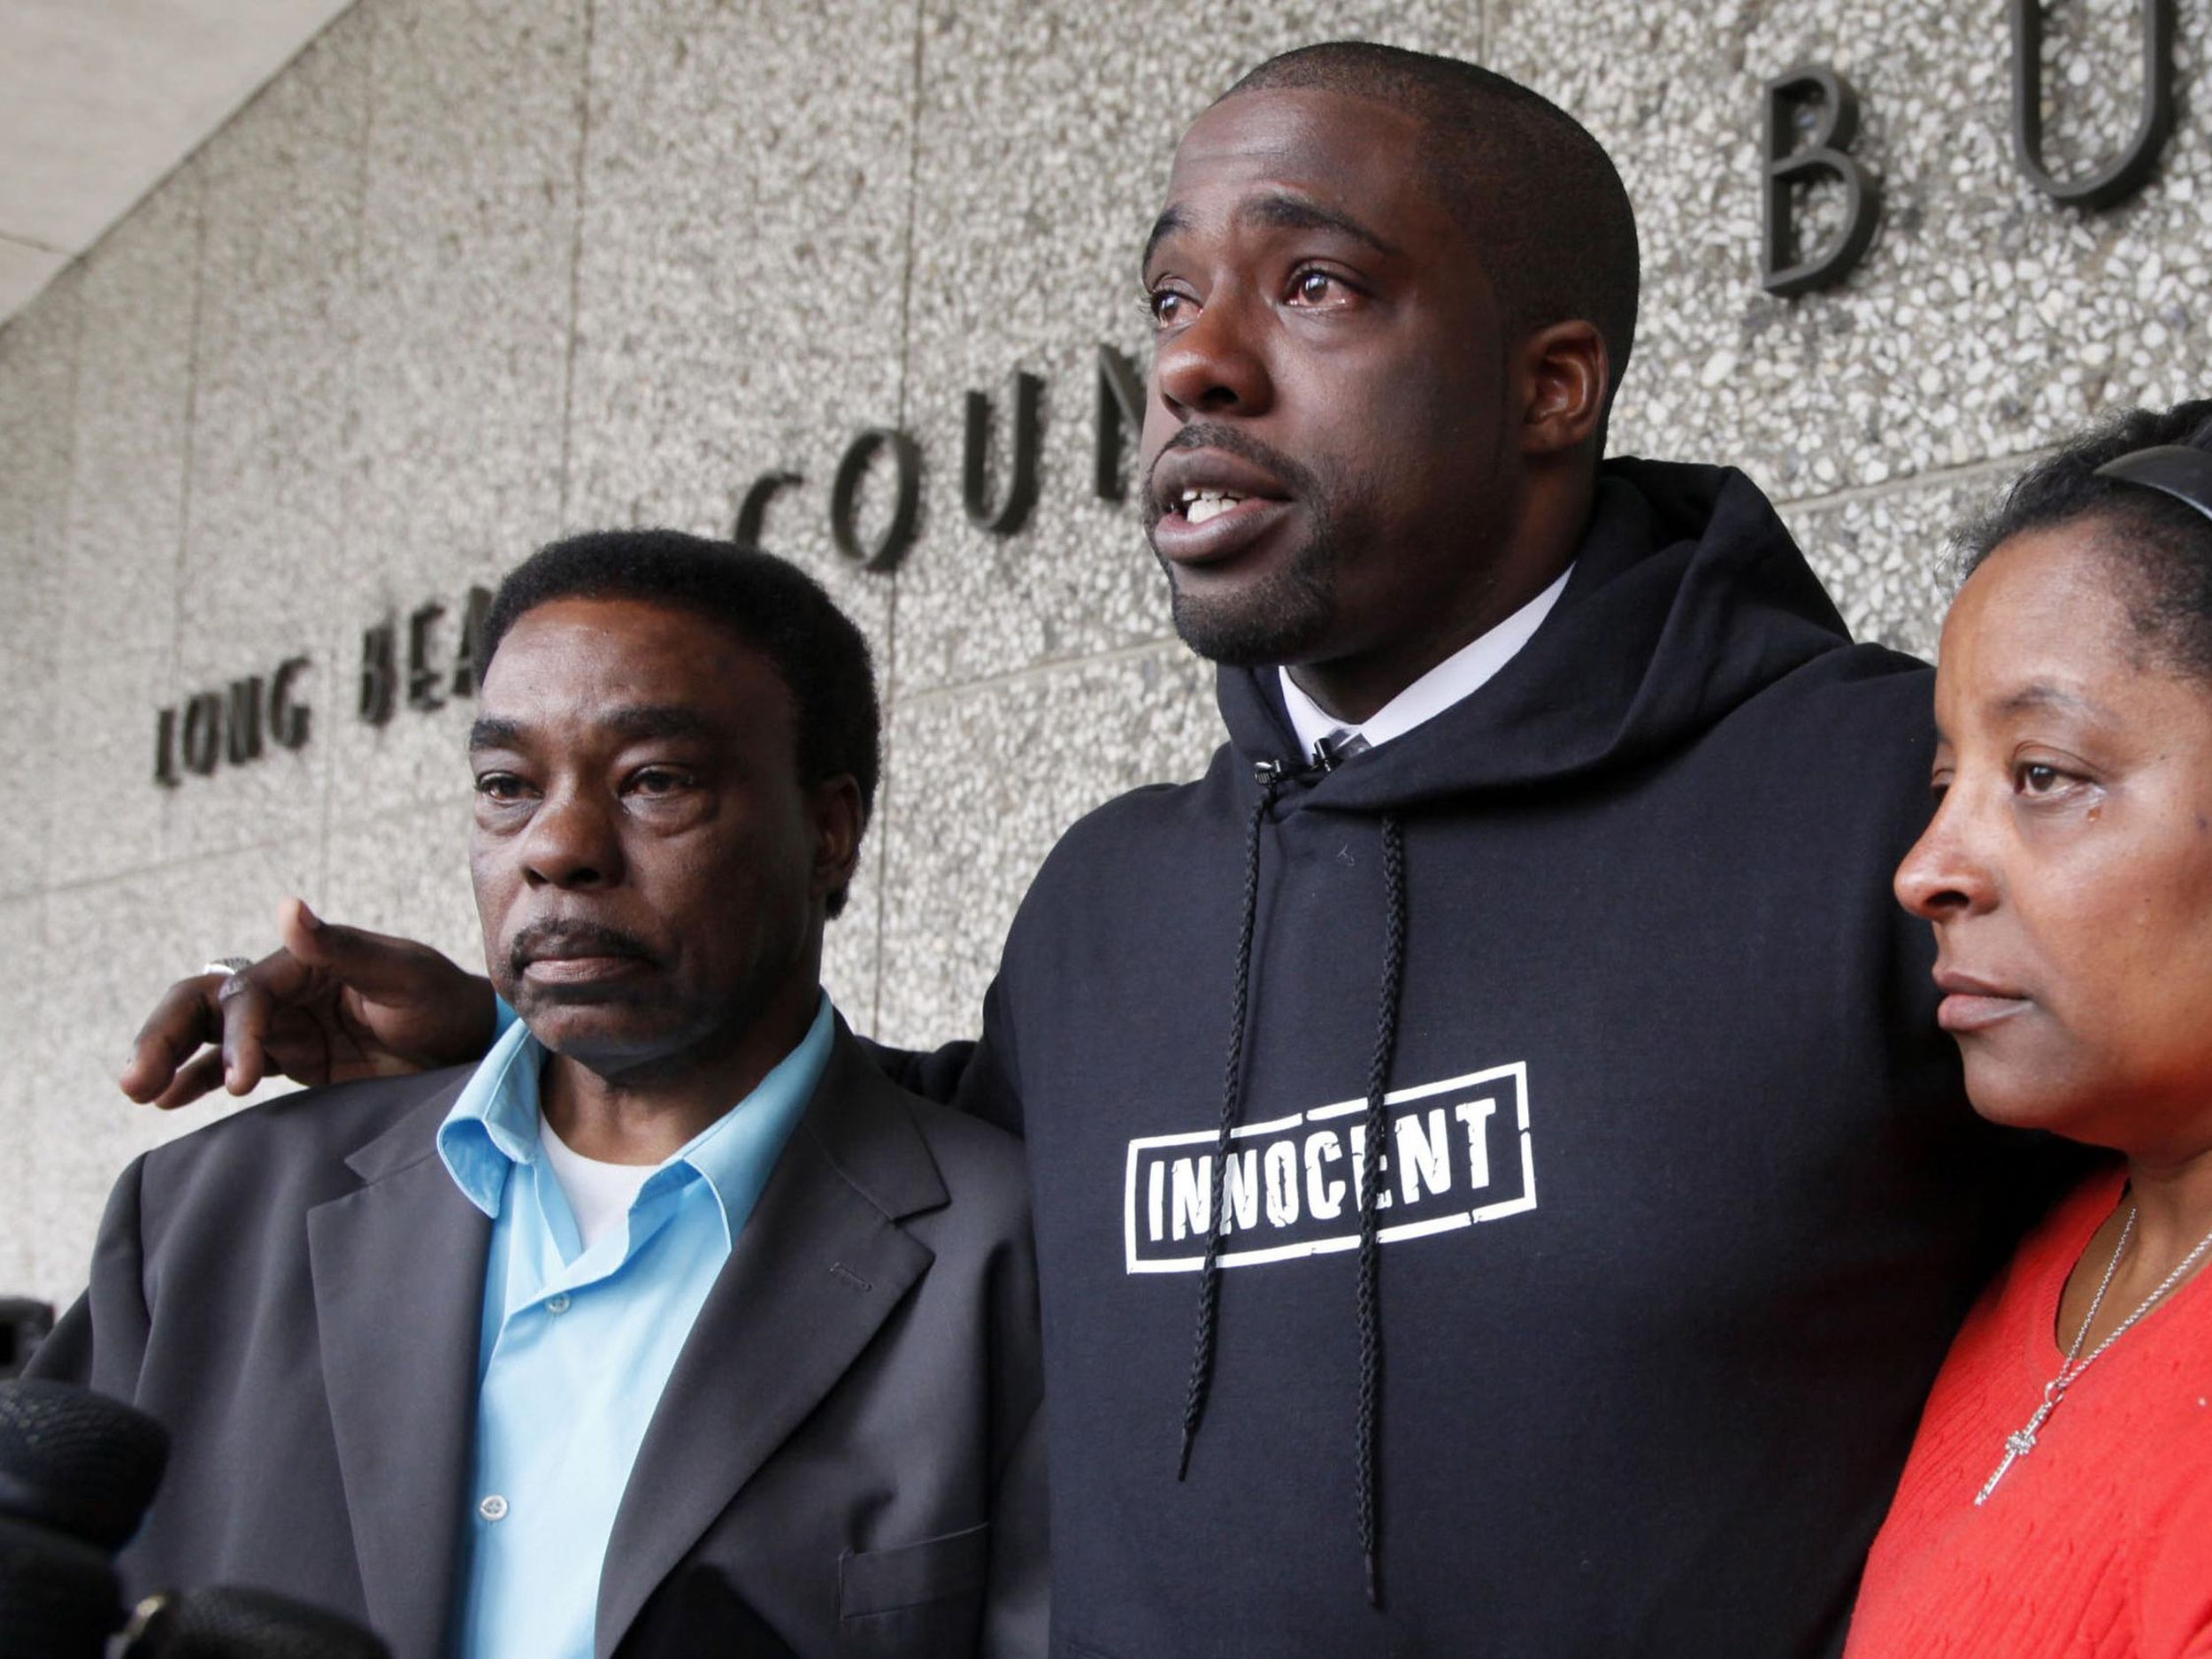 The Real Brian Banks Speaks Out On Prison Injustice Reform The Spokesman Review